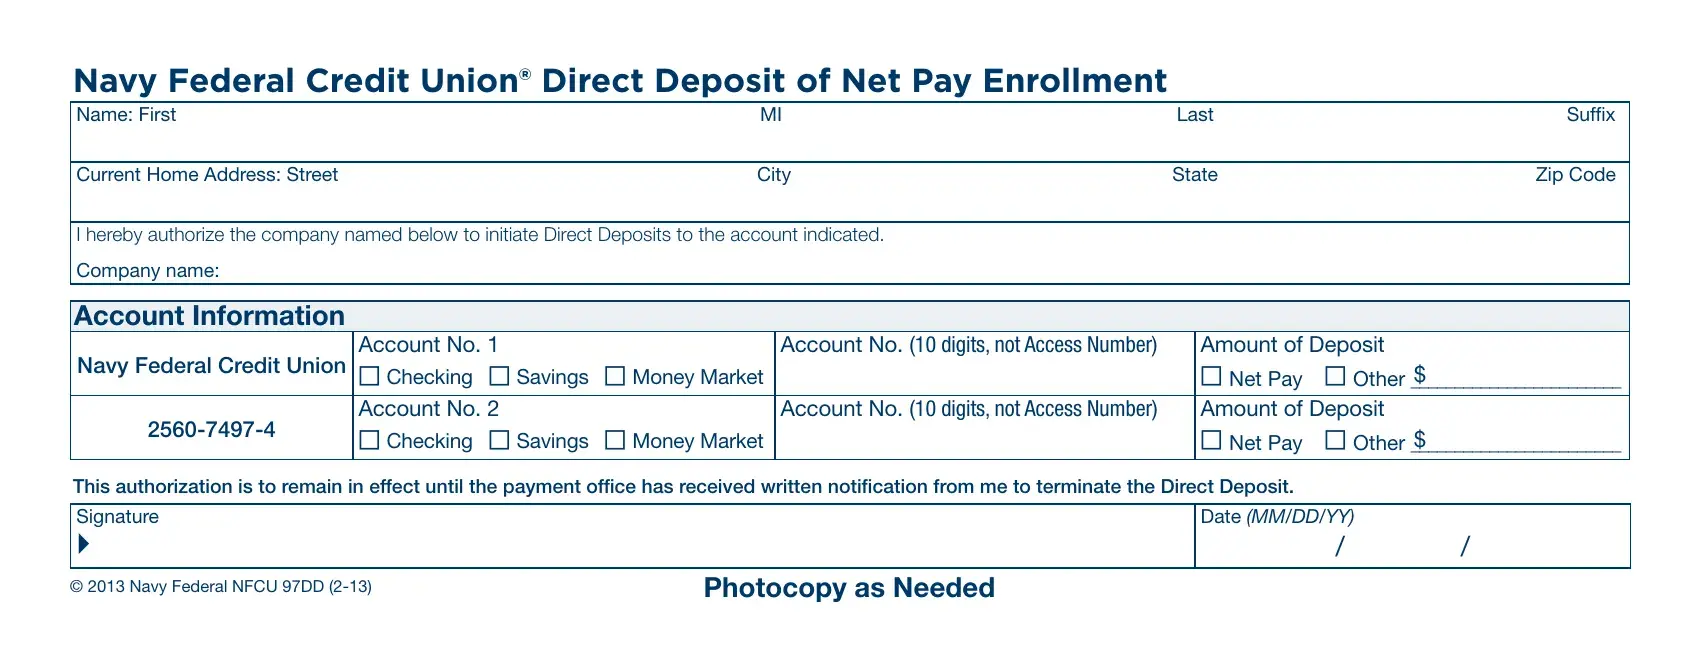 voided check for direct deposit navy federal